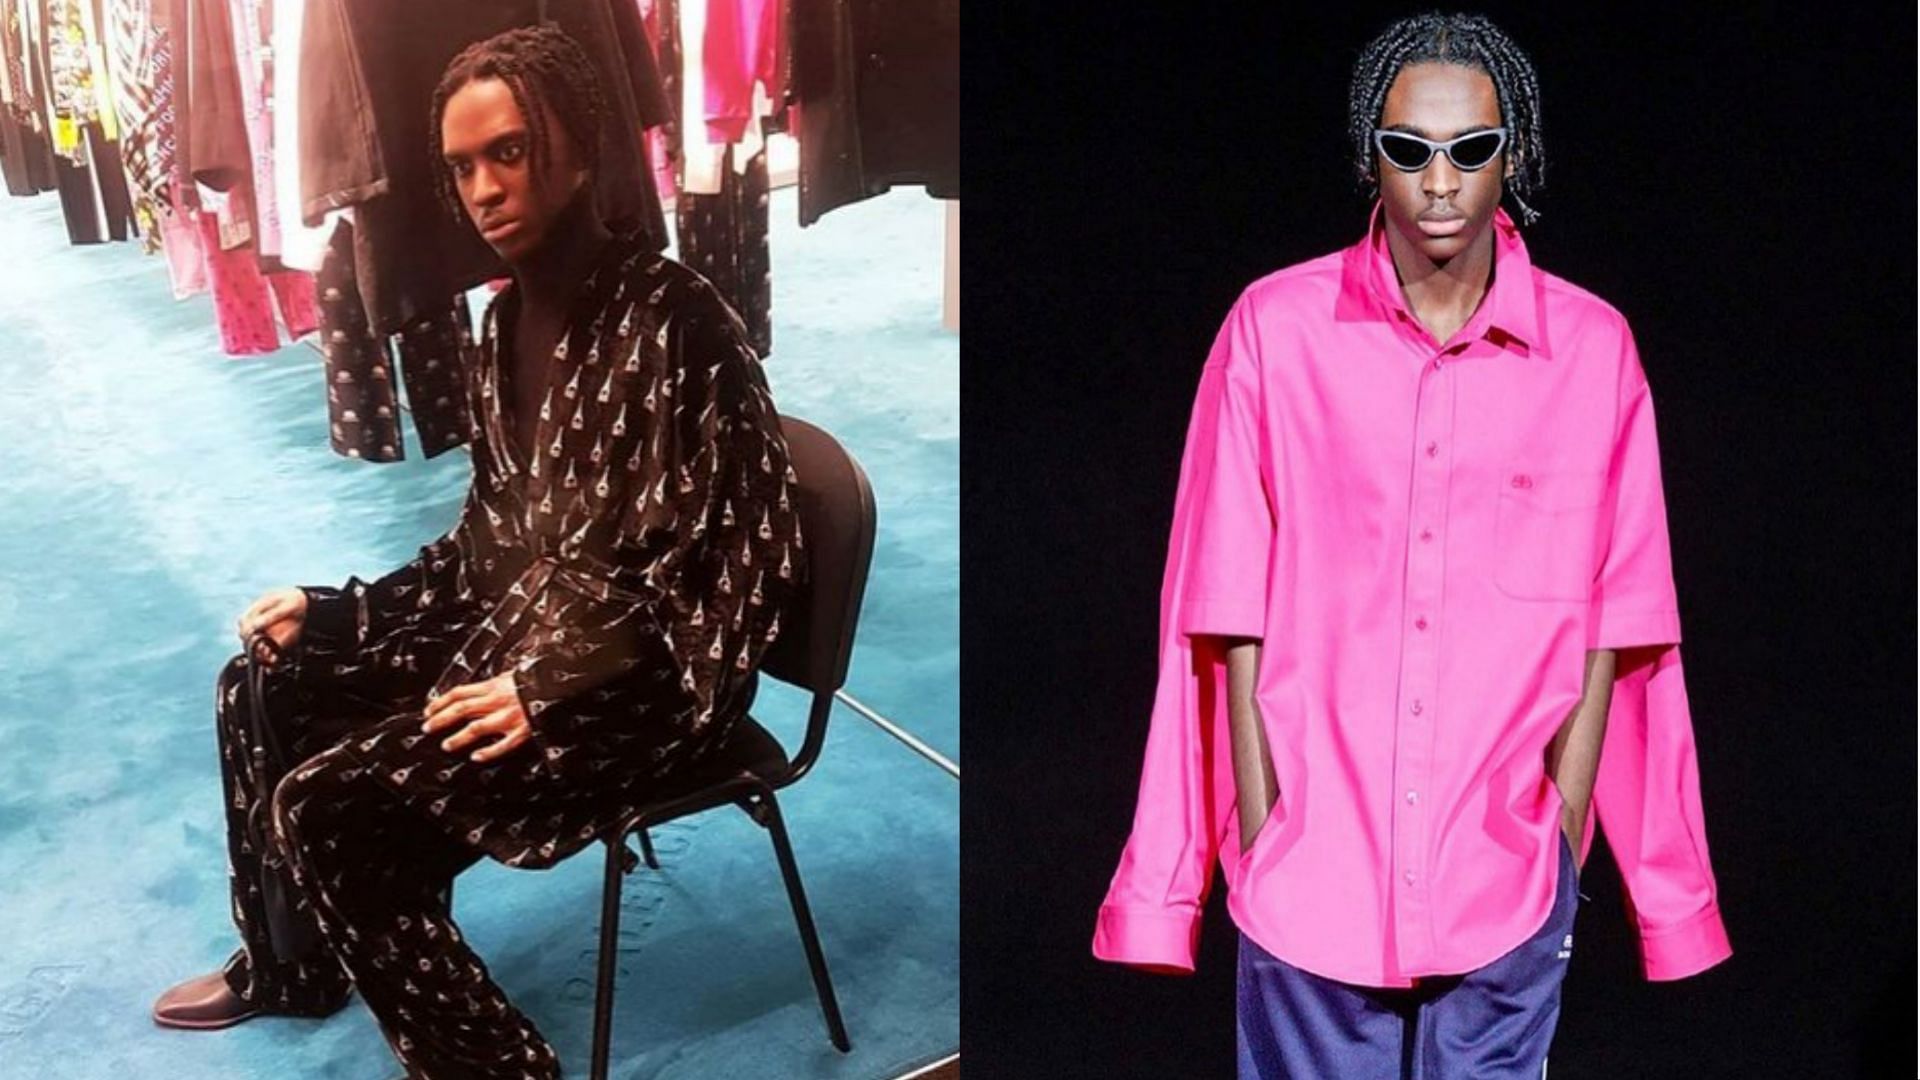 Christopher G goes viral after baring resemblance to Balenciaga mannequin (Image via chriss__tyler/Instagram) 